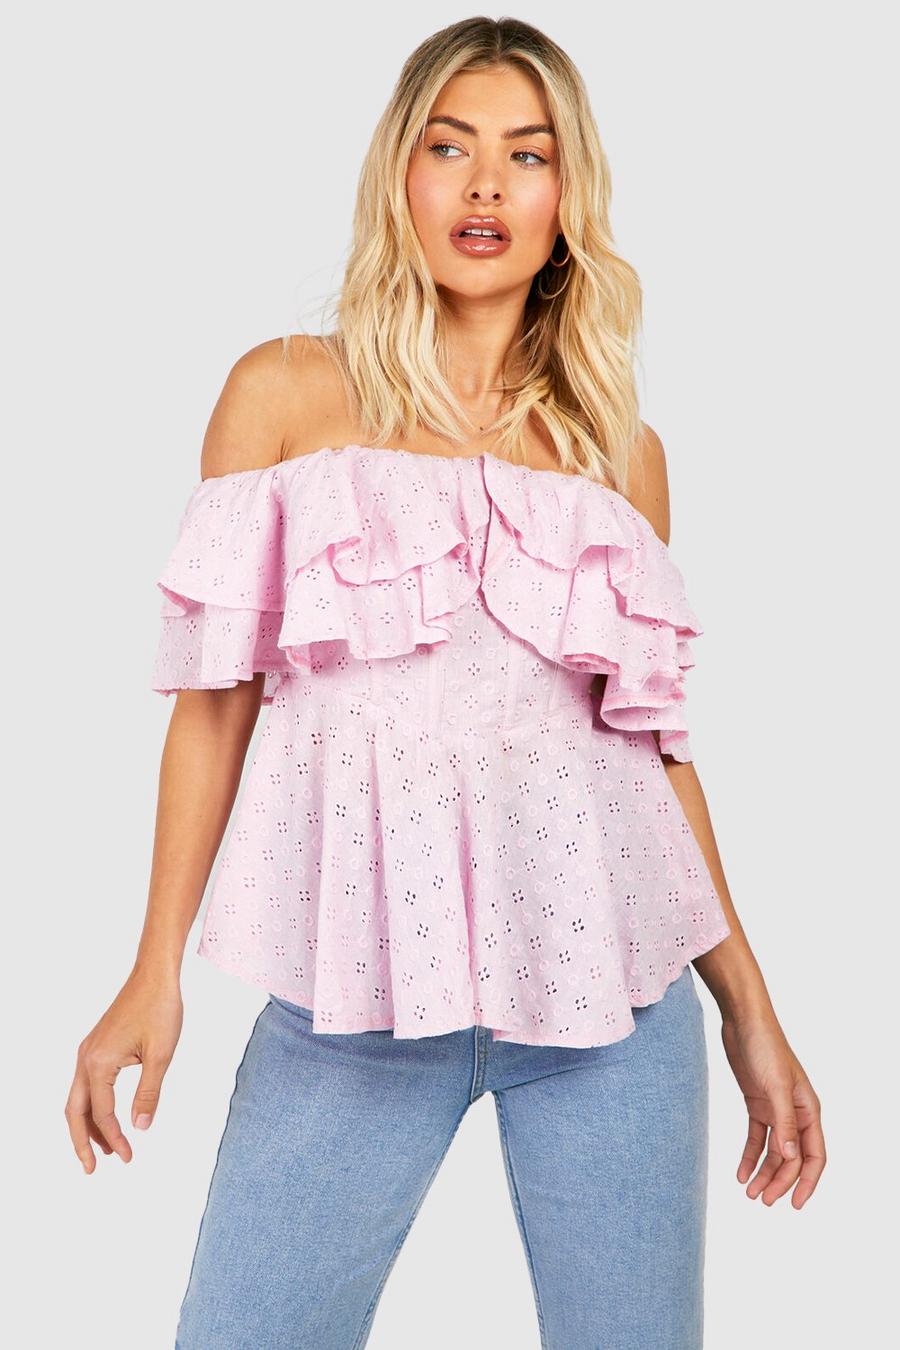 Lilac purple Ruffle Off The Shoulder Eyelet Corset Top